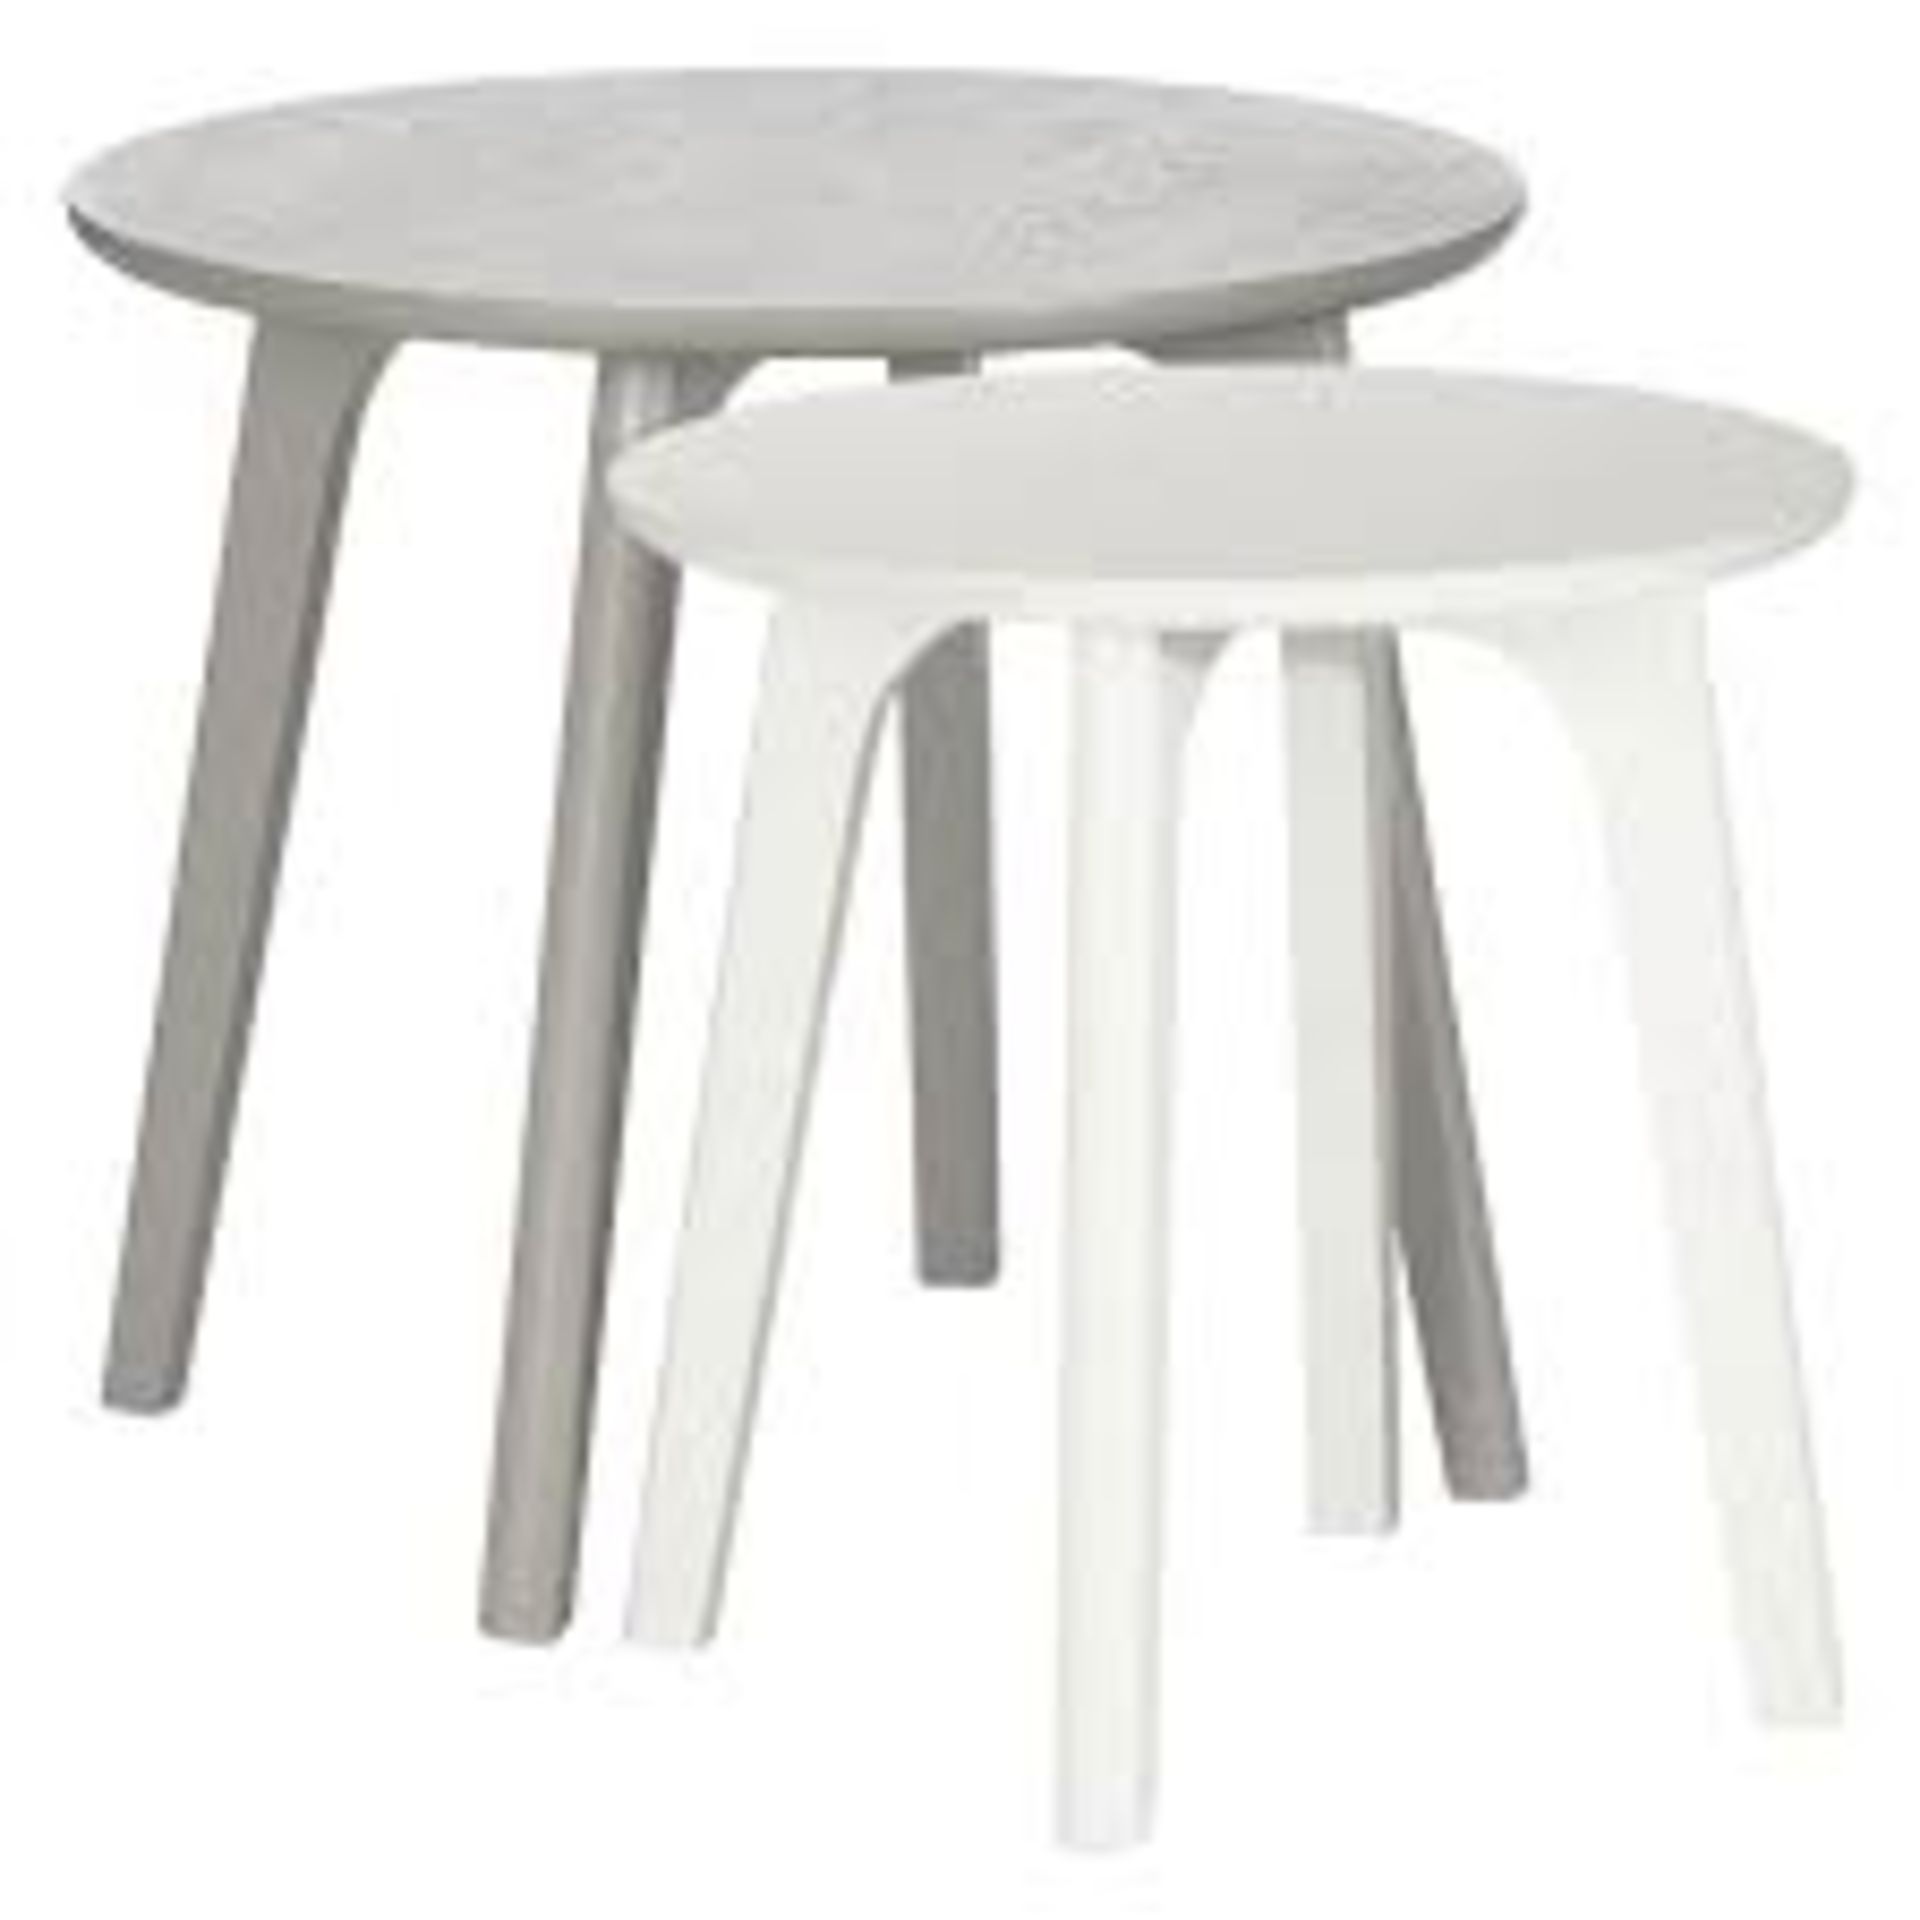 Boxed John Lewis & Partners Dillan House Nest Of 2 Tables RRP £90 (NBW634401) (Pictures Are For